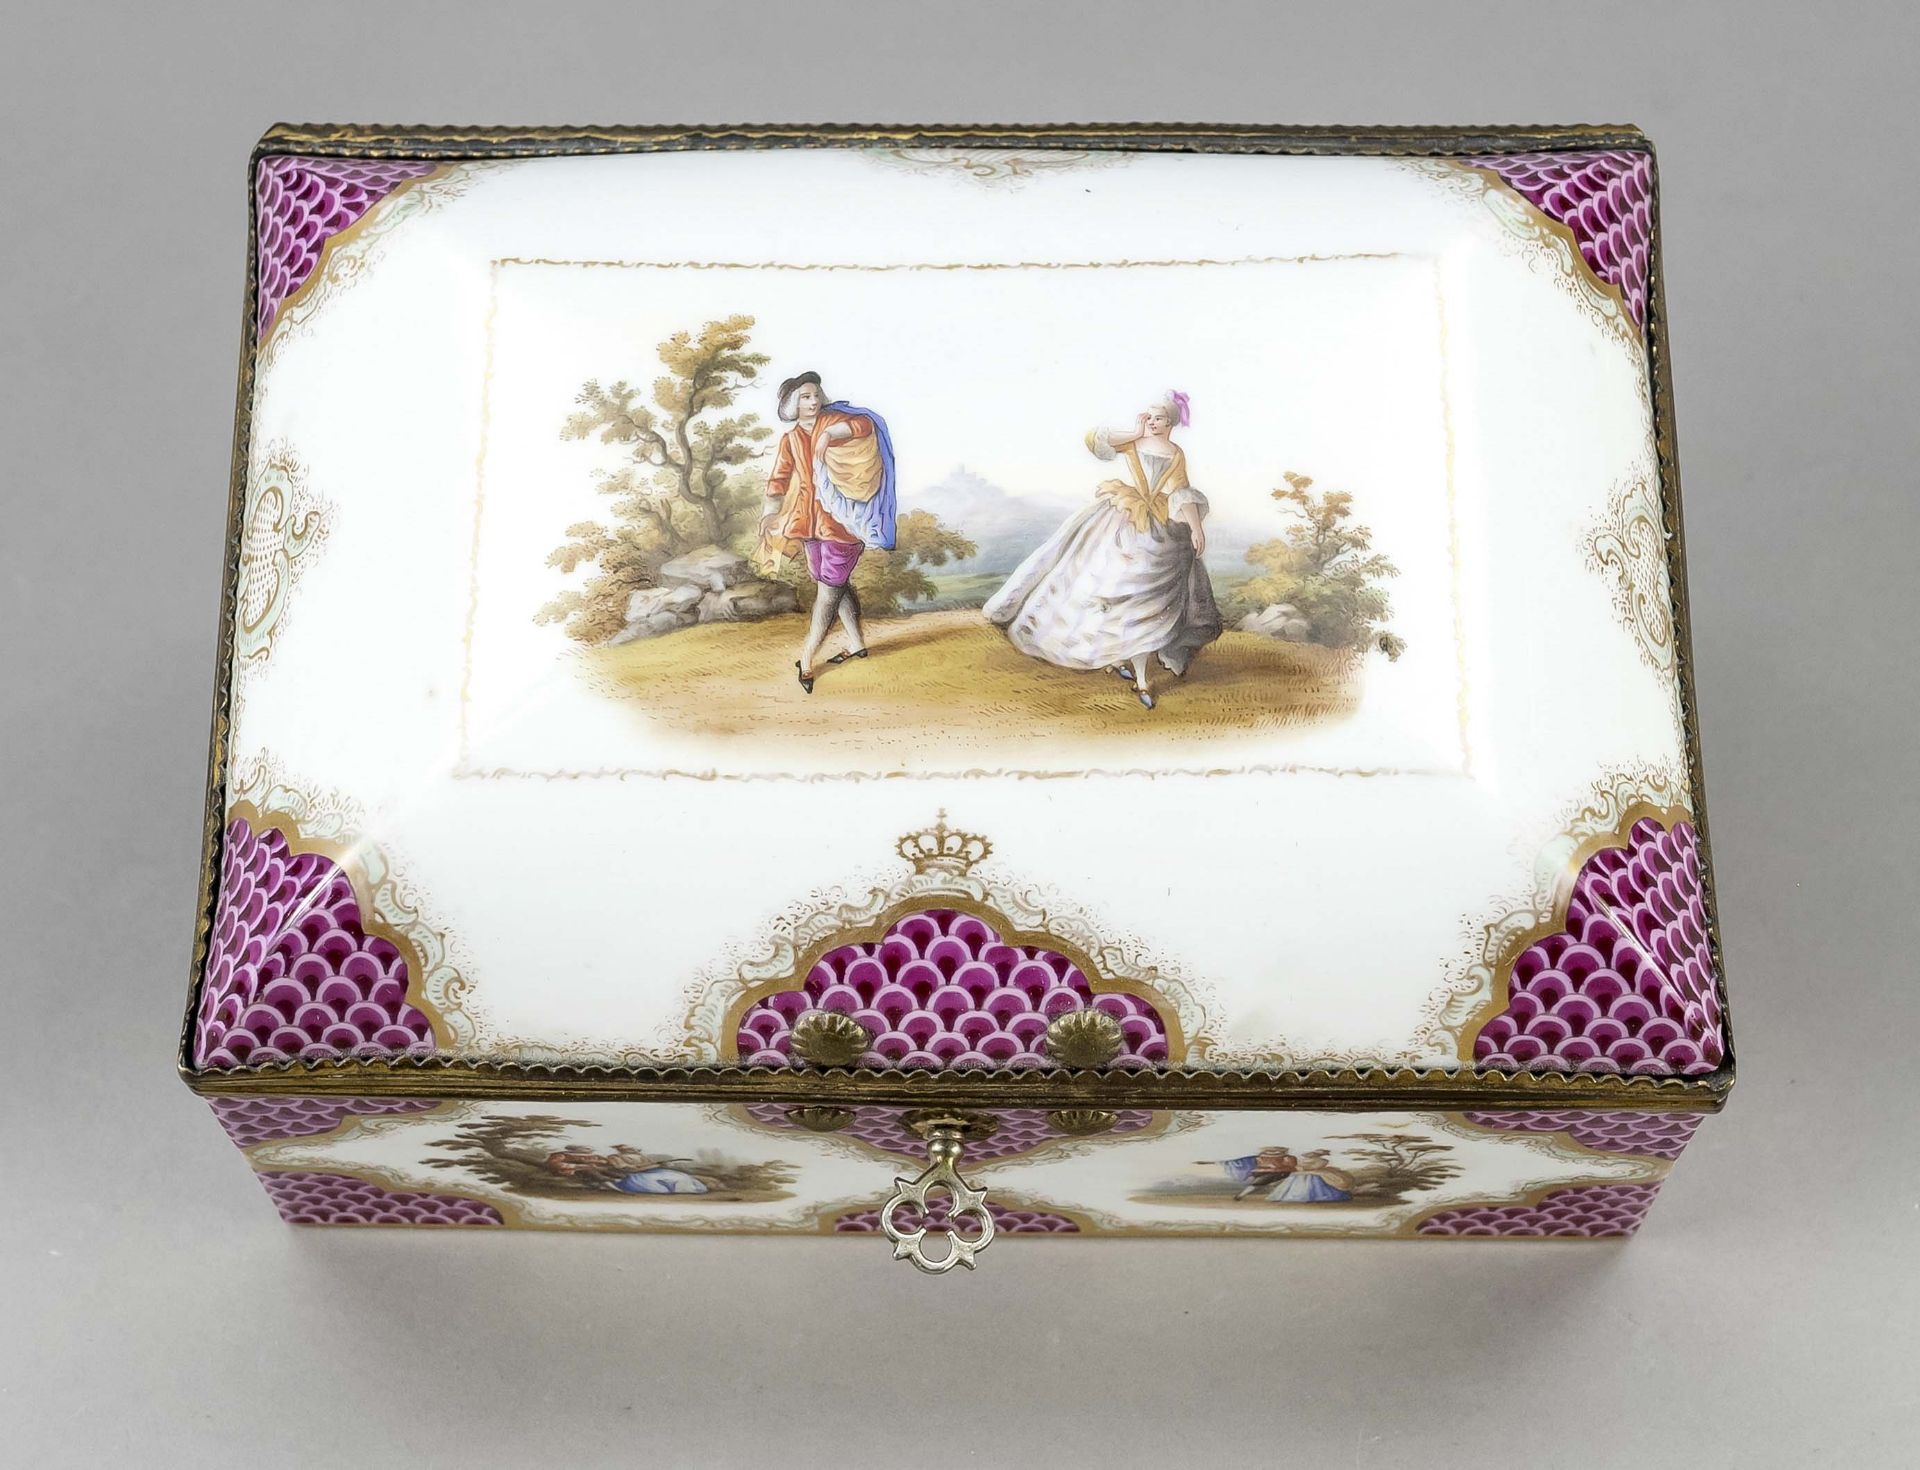 Lidded box in the style of Meissen, w. 18/19th c., fine polychrome painting with gallant couples - Image 2 of 7